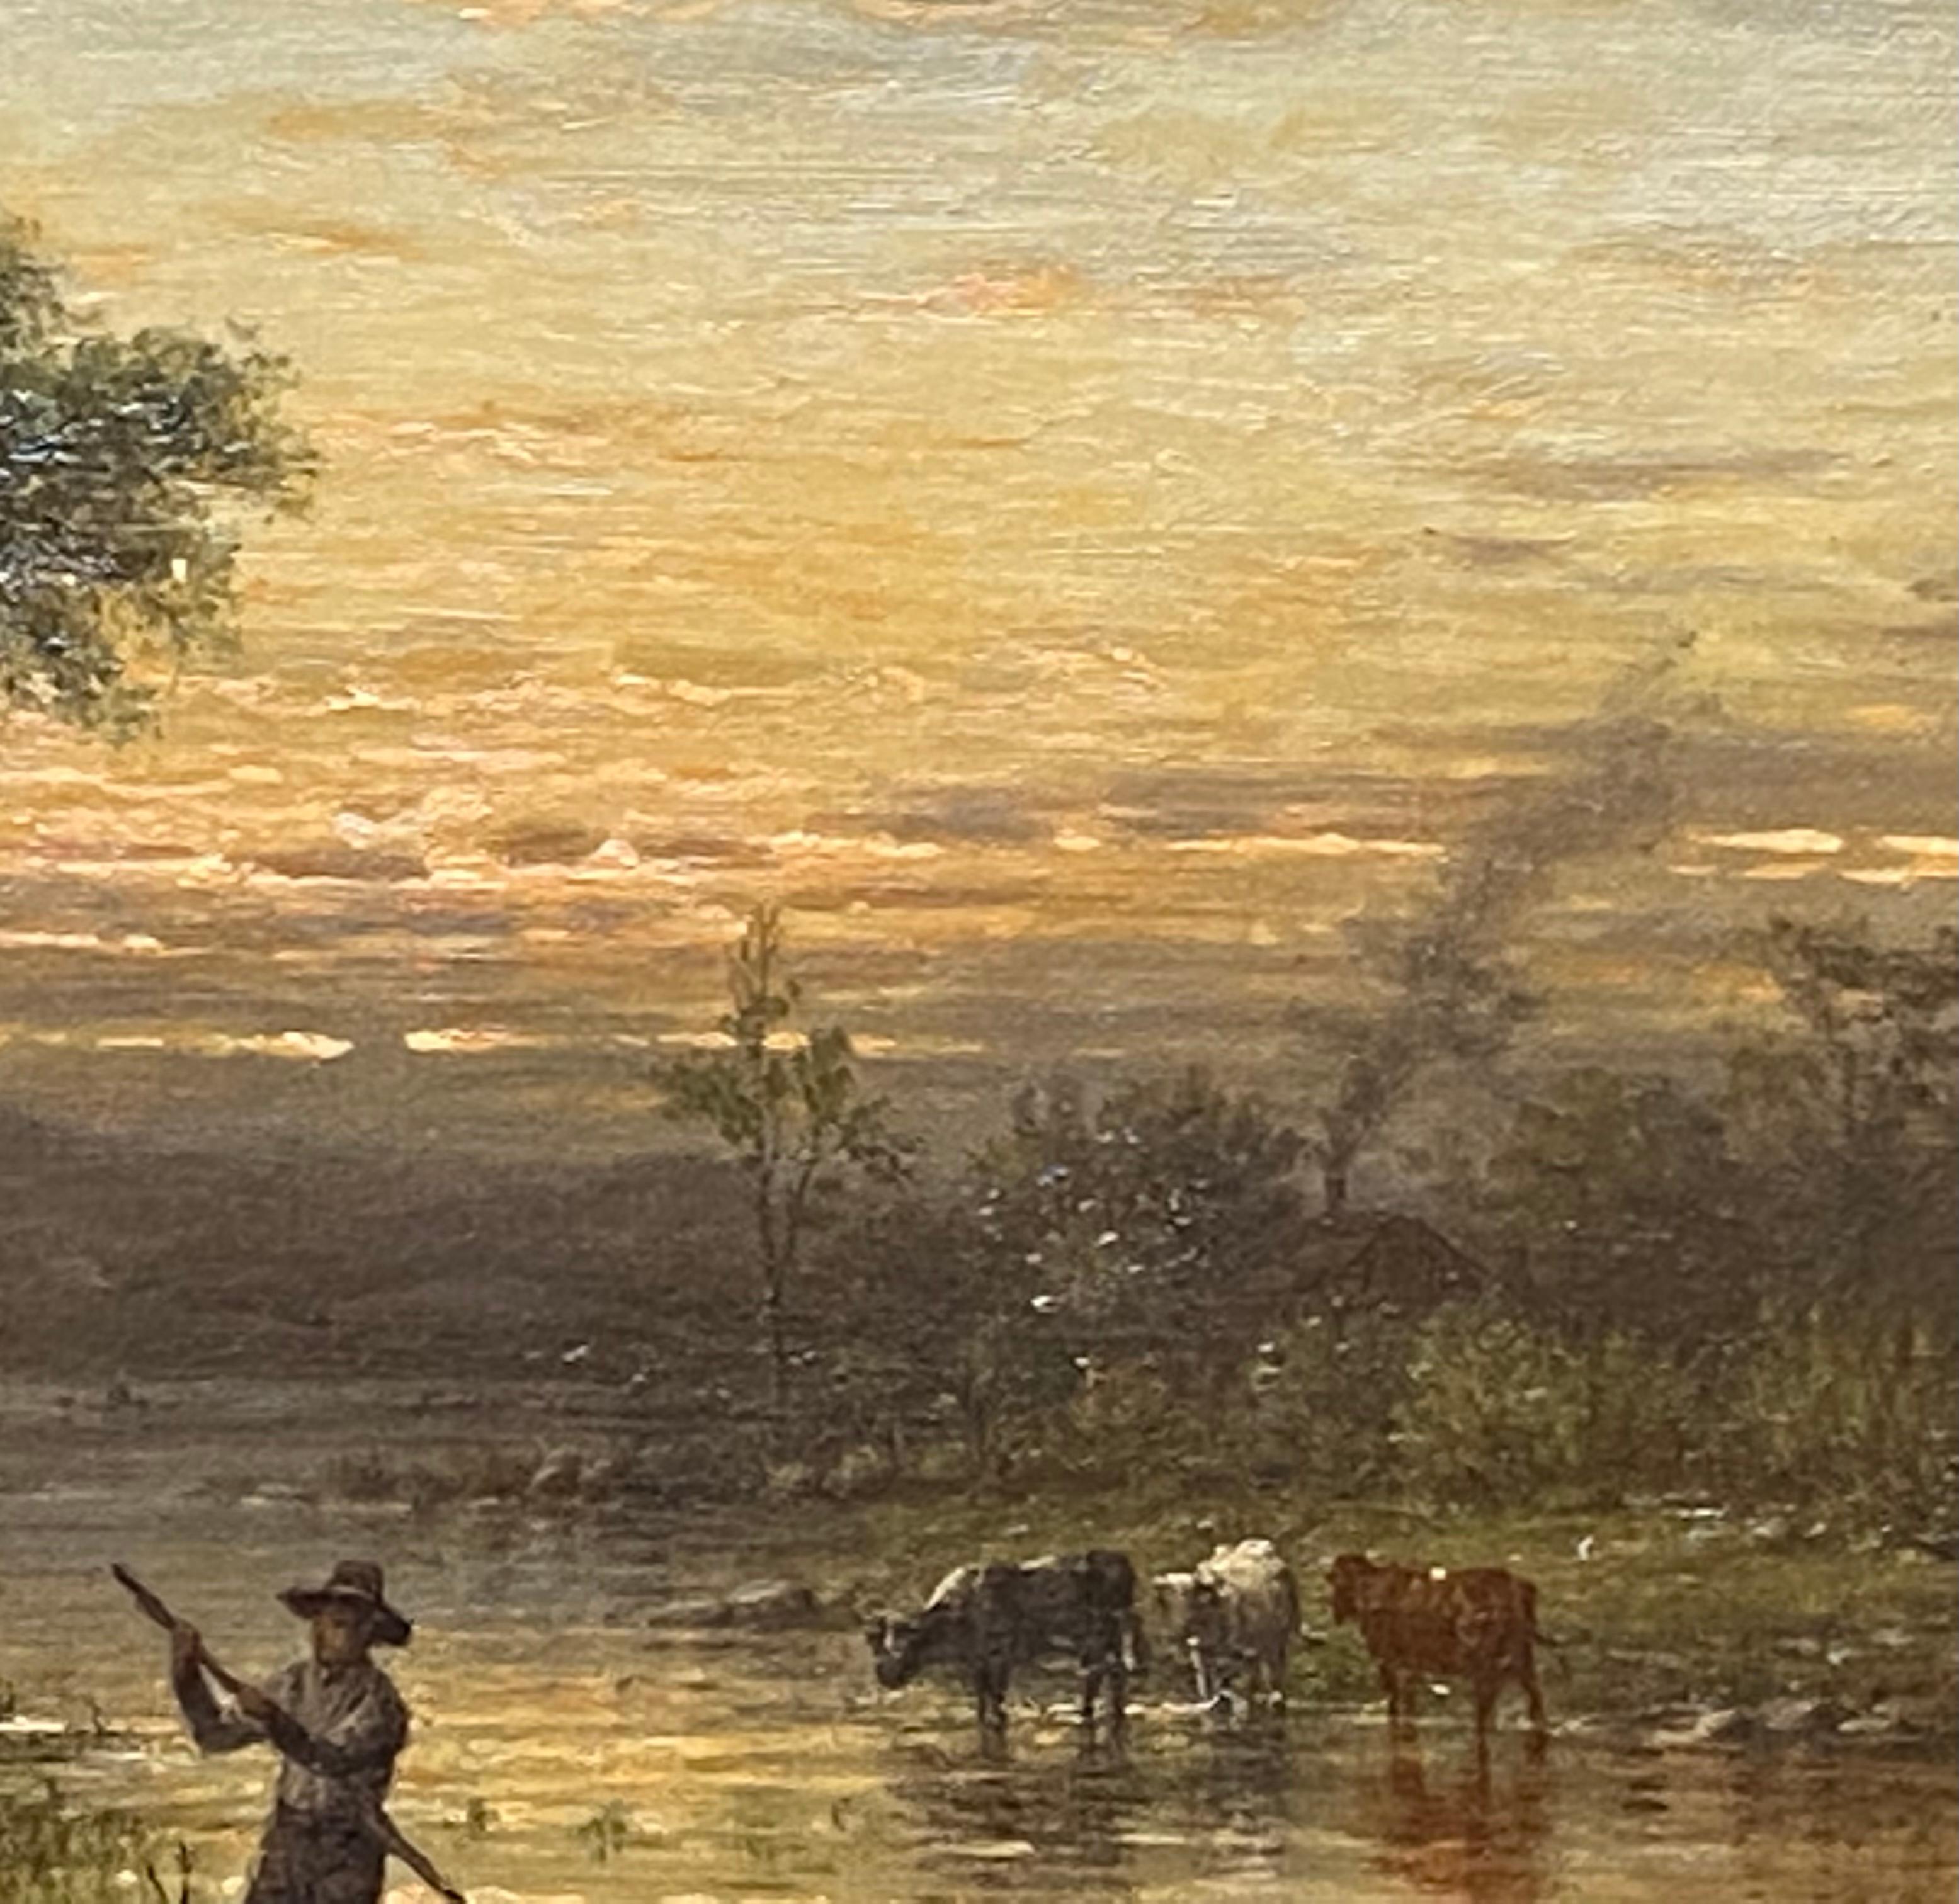 “Sunset on the River” - Academic Painting by George Riecke